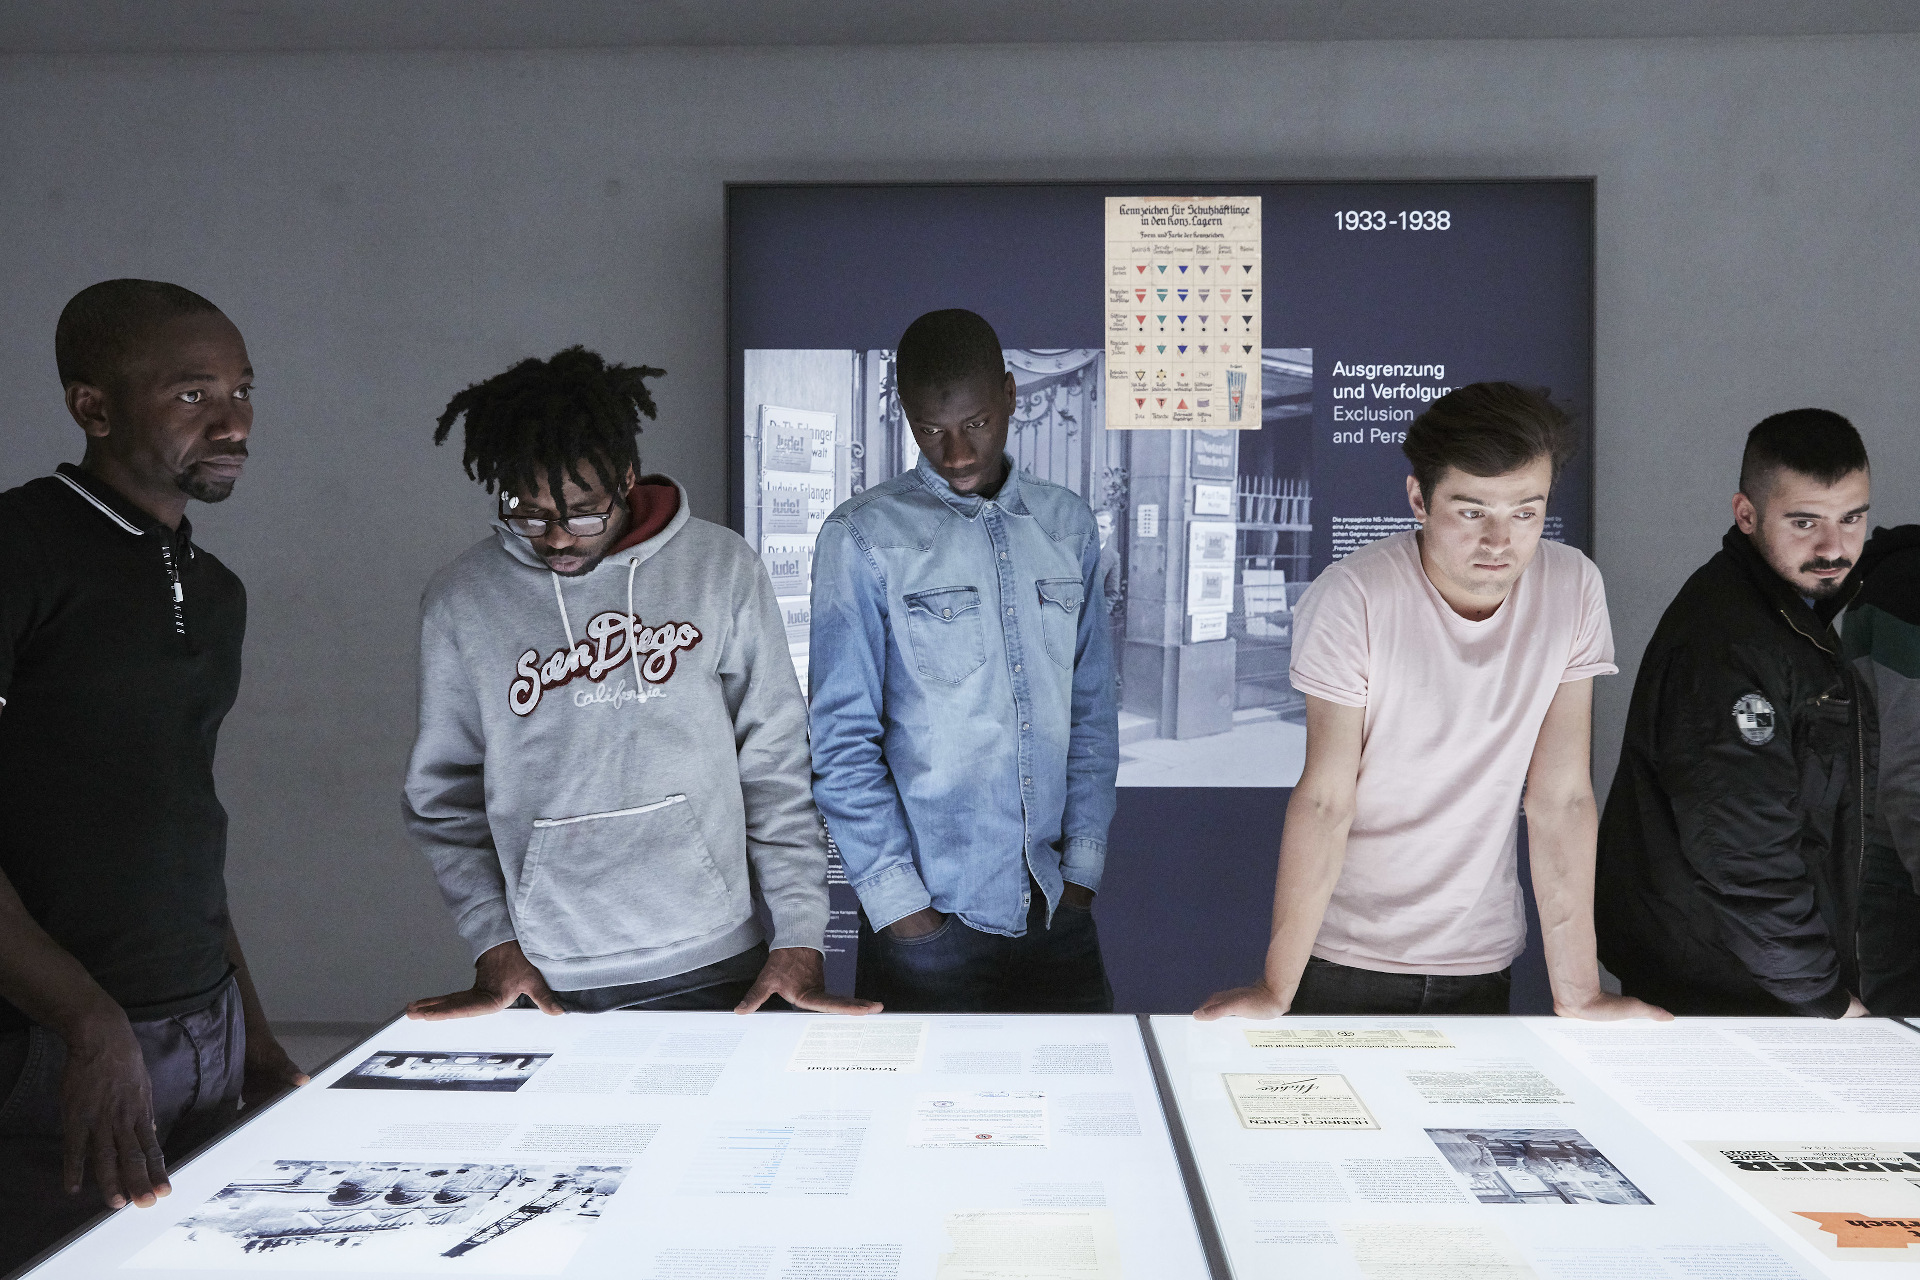 Five young people standing in front of one of the exhibition’s illuminated tables.